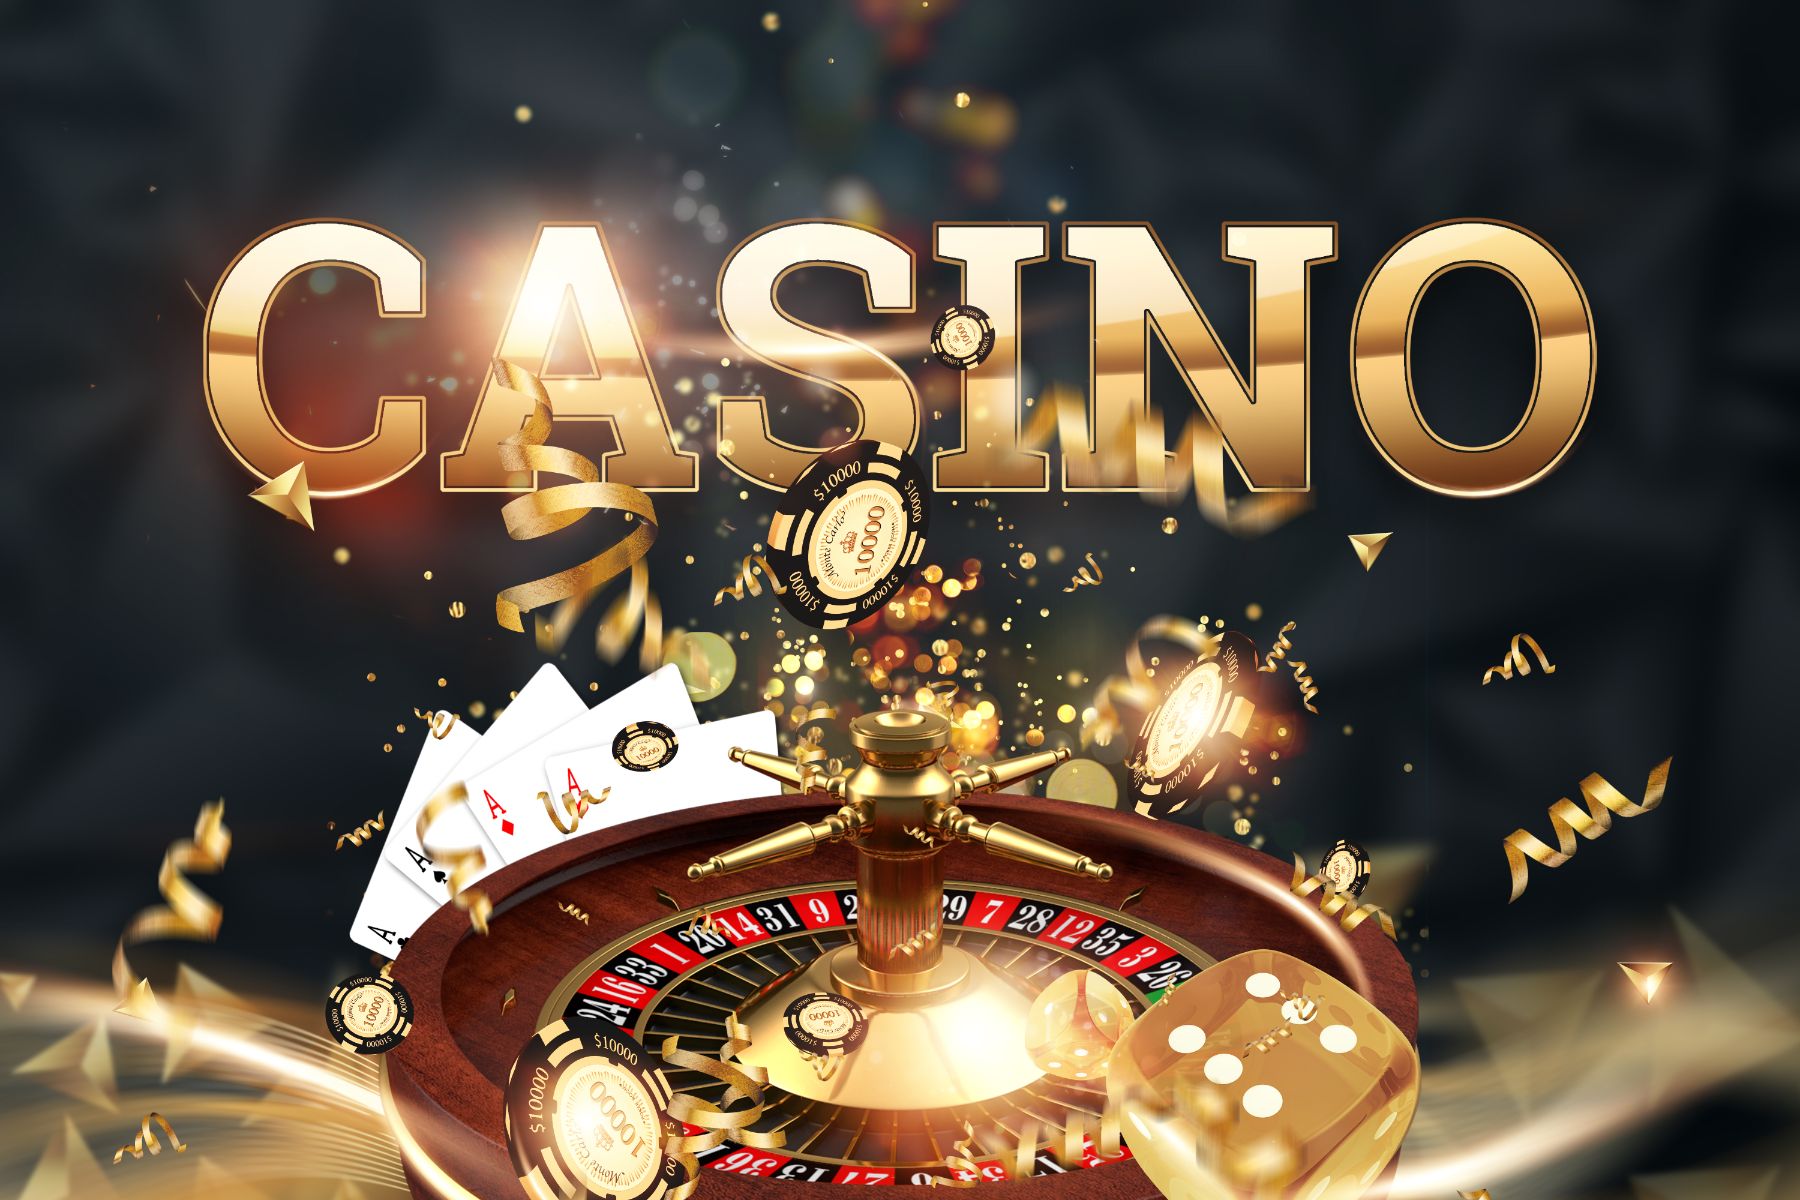 Casino With Free Spins No Deposit